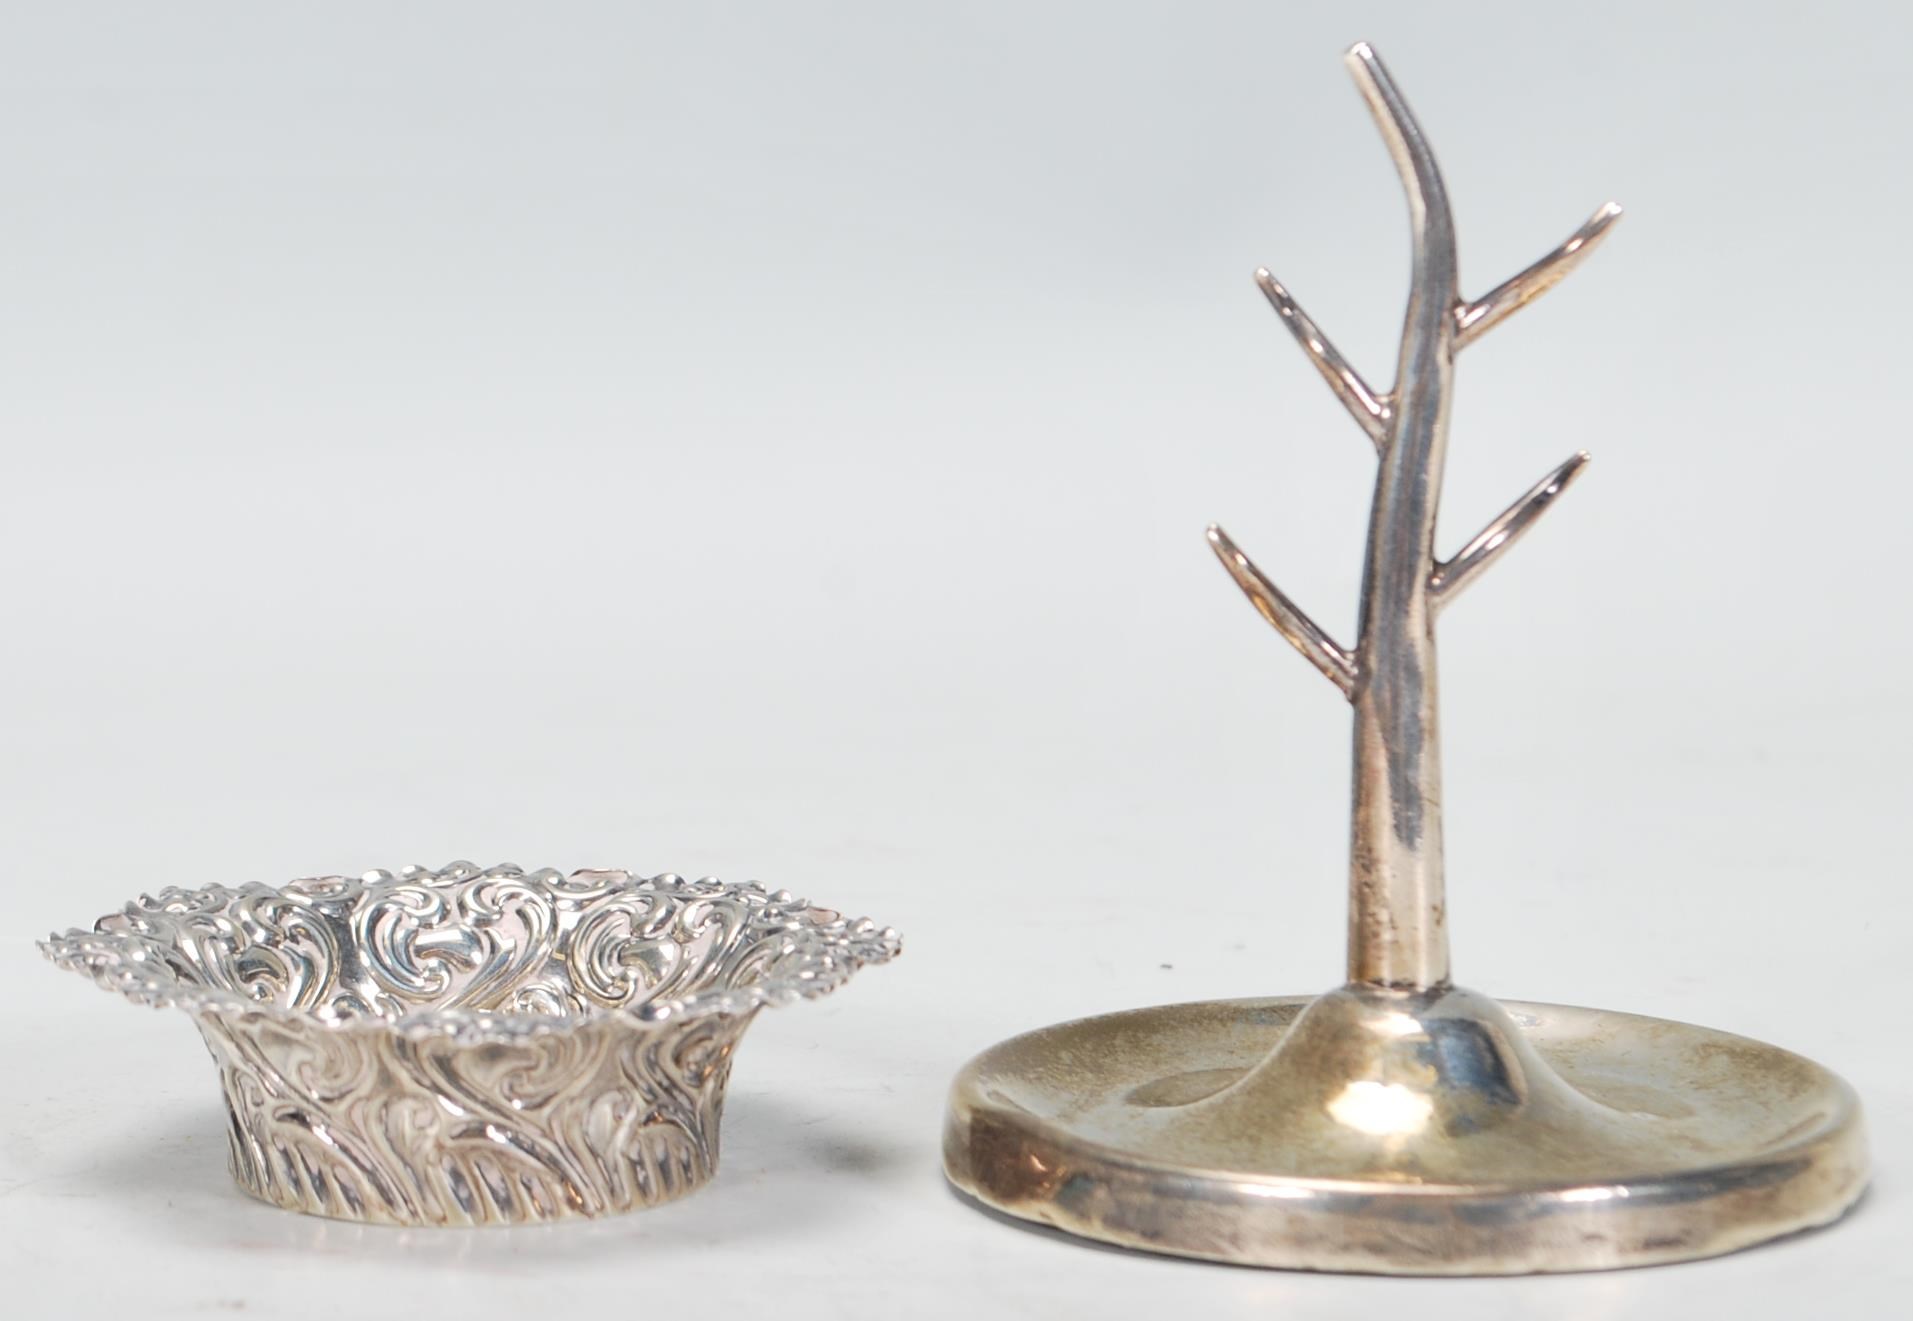 A silver hallmarked William Aitkin ring stand in the form of a tree in a round dish / base (